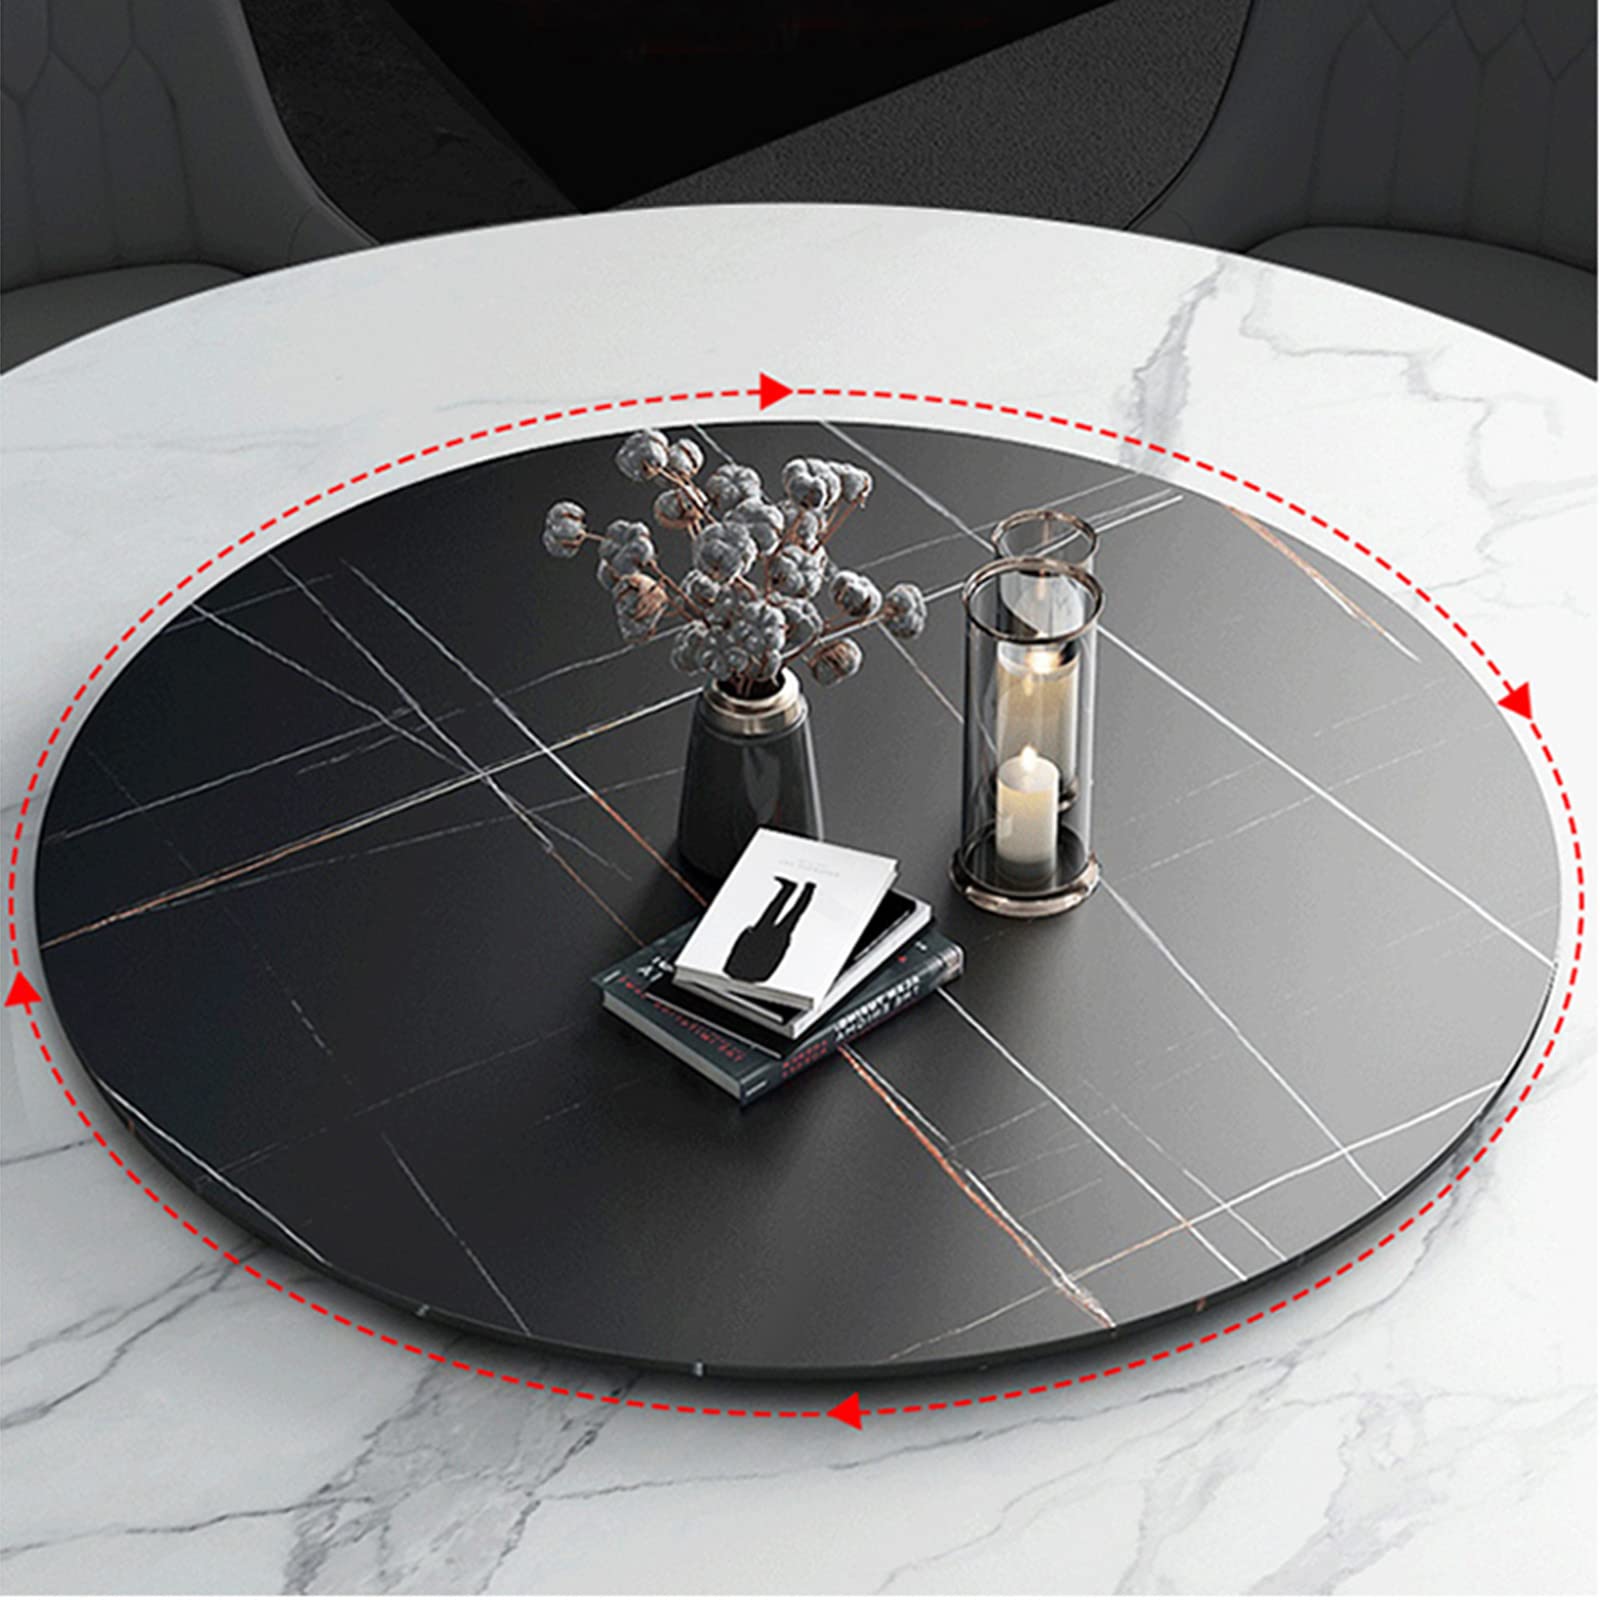 SHEHello Lazy Susan Turntable Organizer Rotating Serving Plate Large Marble Dining Table Round Dining Table Top for Cheese Dessert Fruit Baking Cake 50 to 90cm Diameter